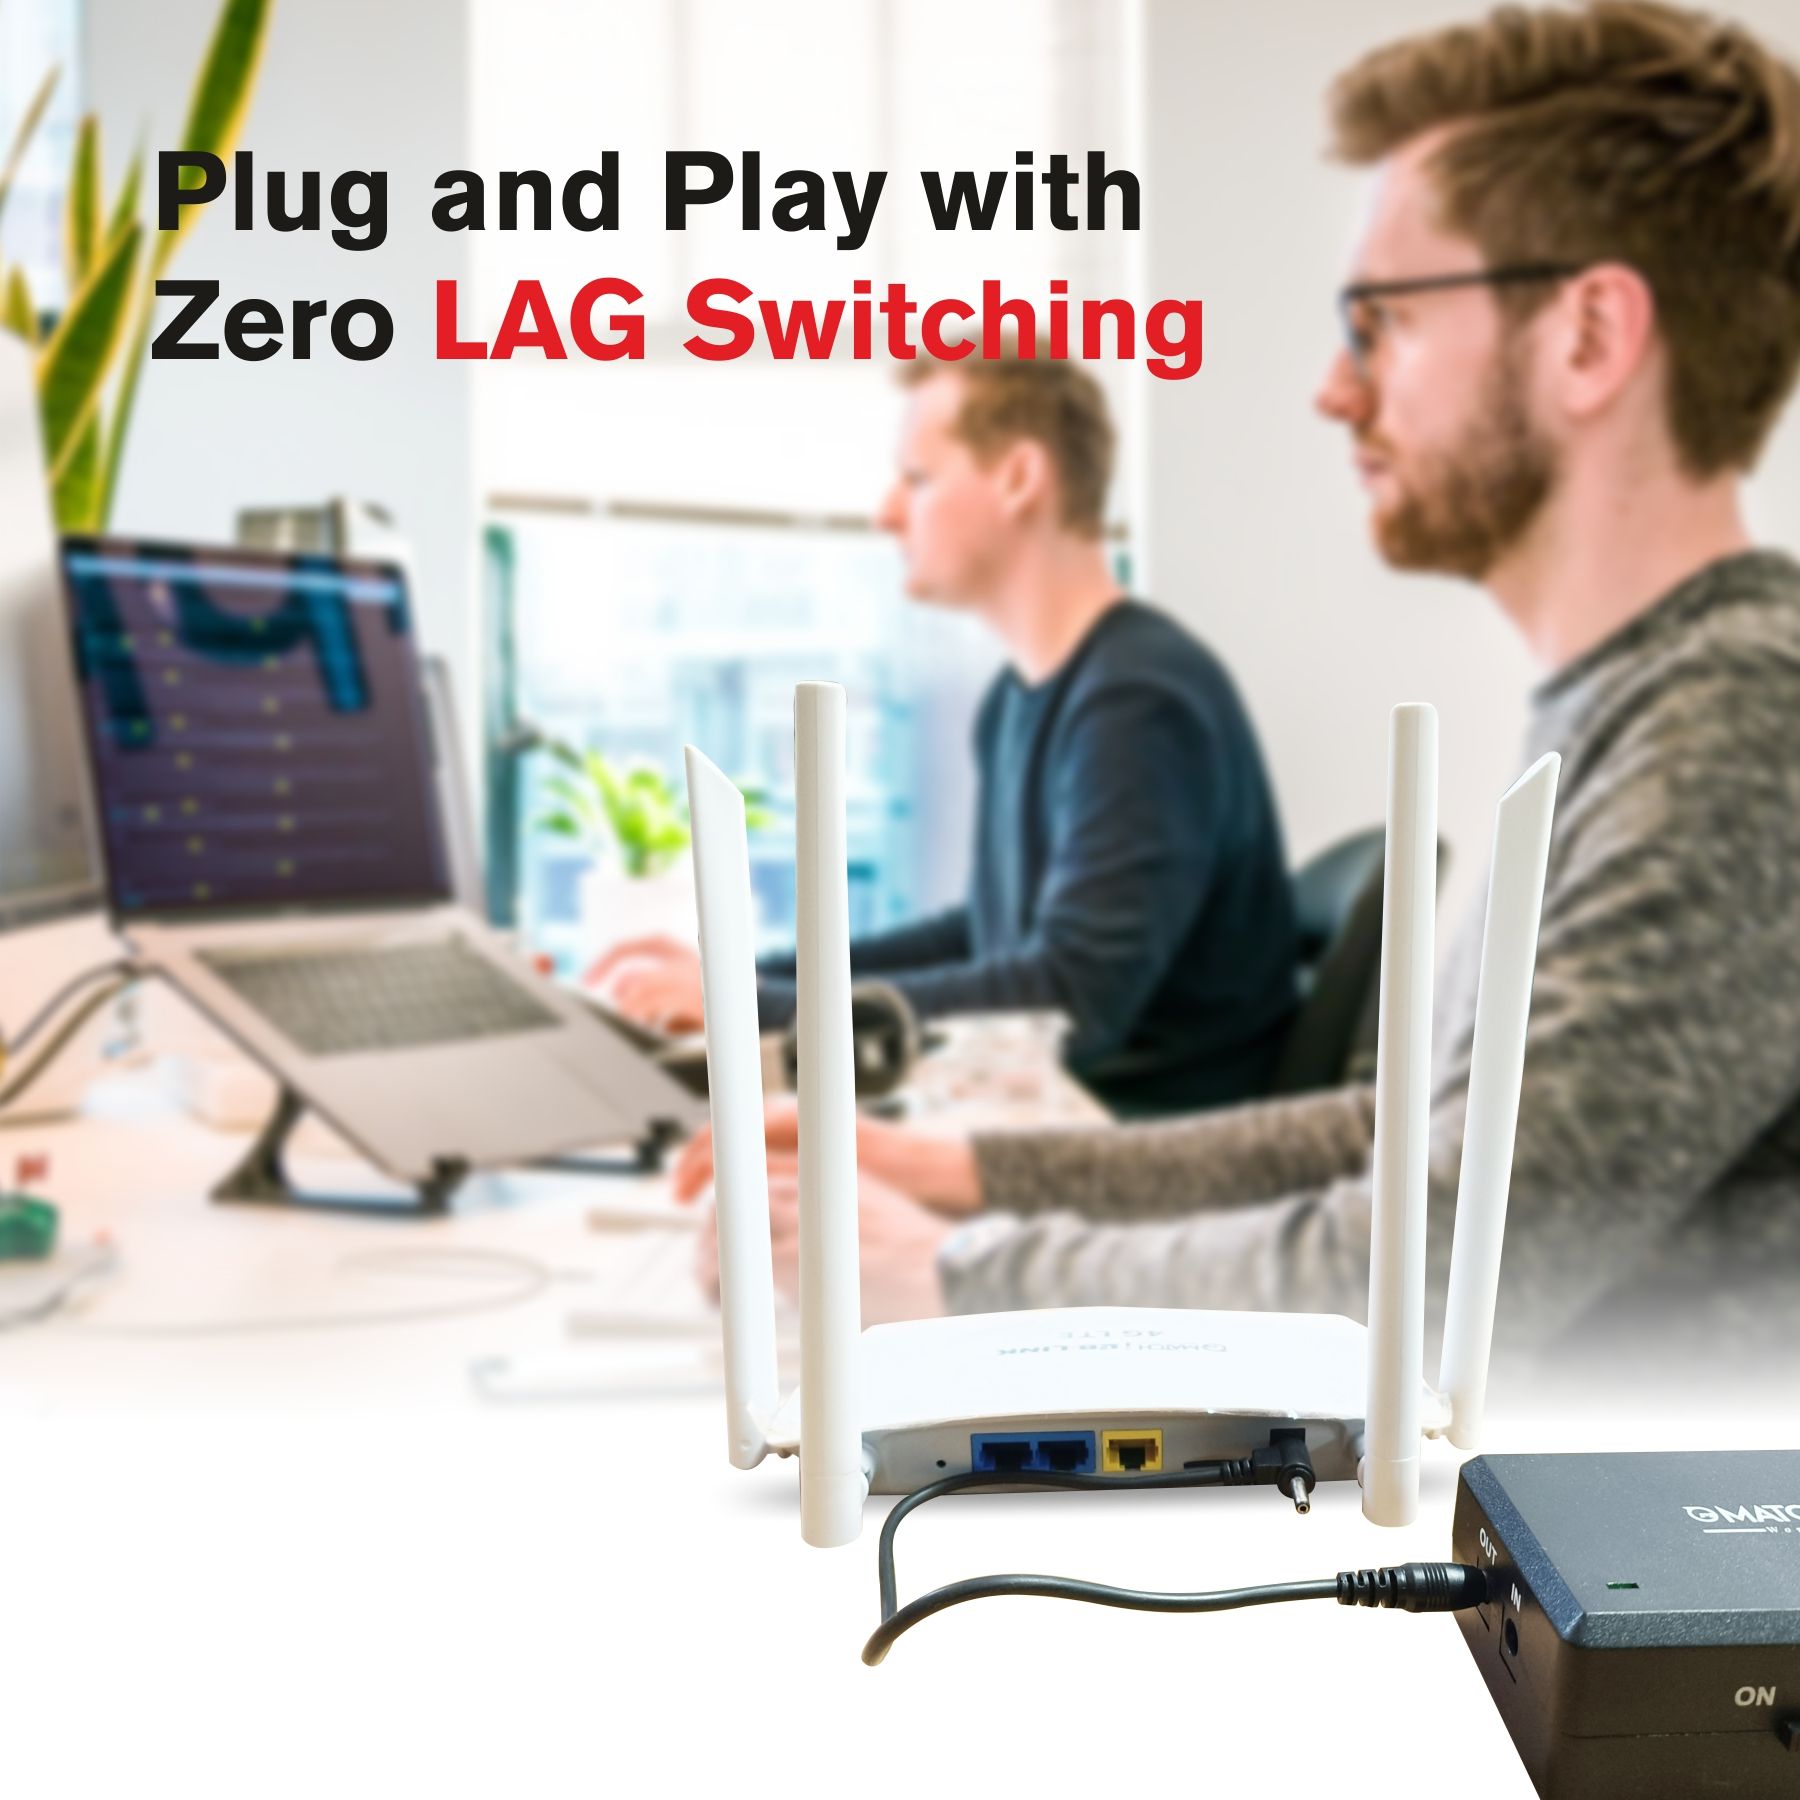 This UPS can be used by just plug and play. There is zero lag in switching the power connection.